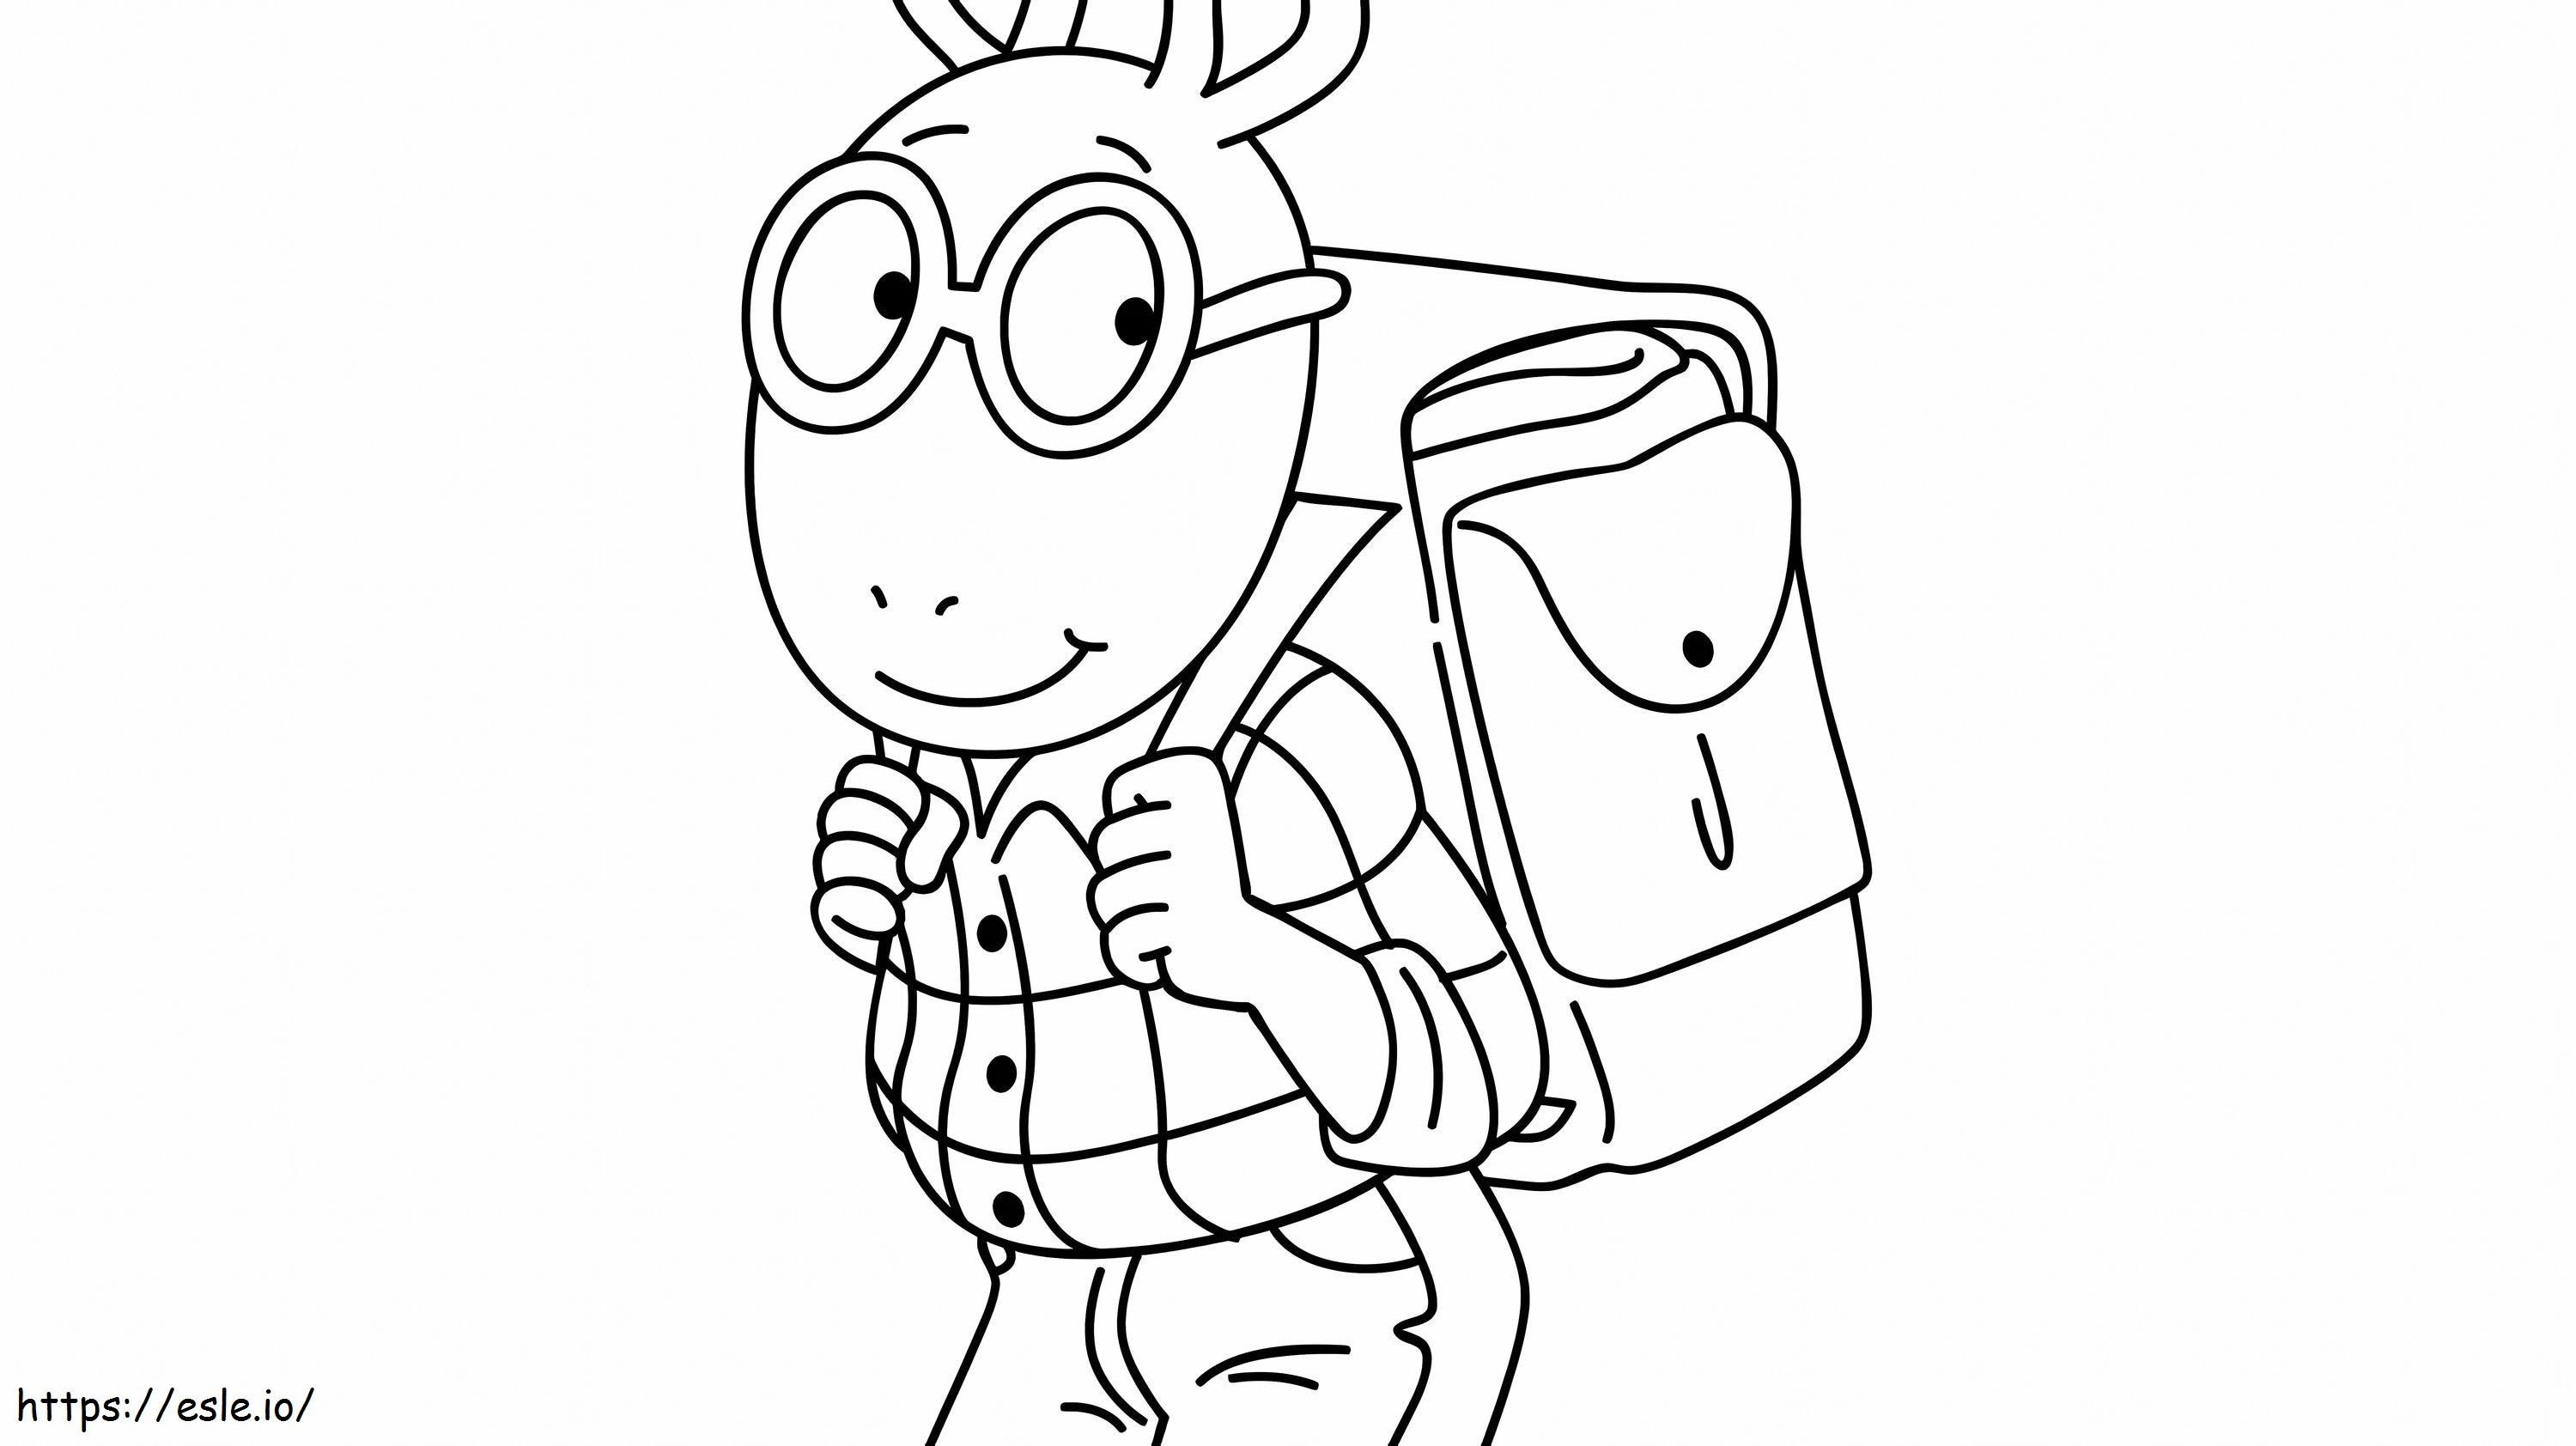 Arthur Read Going To School coloring page